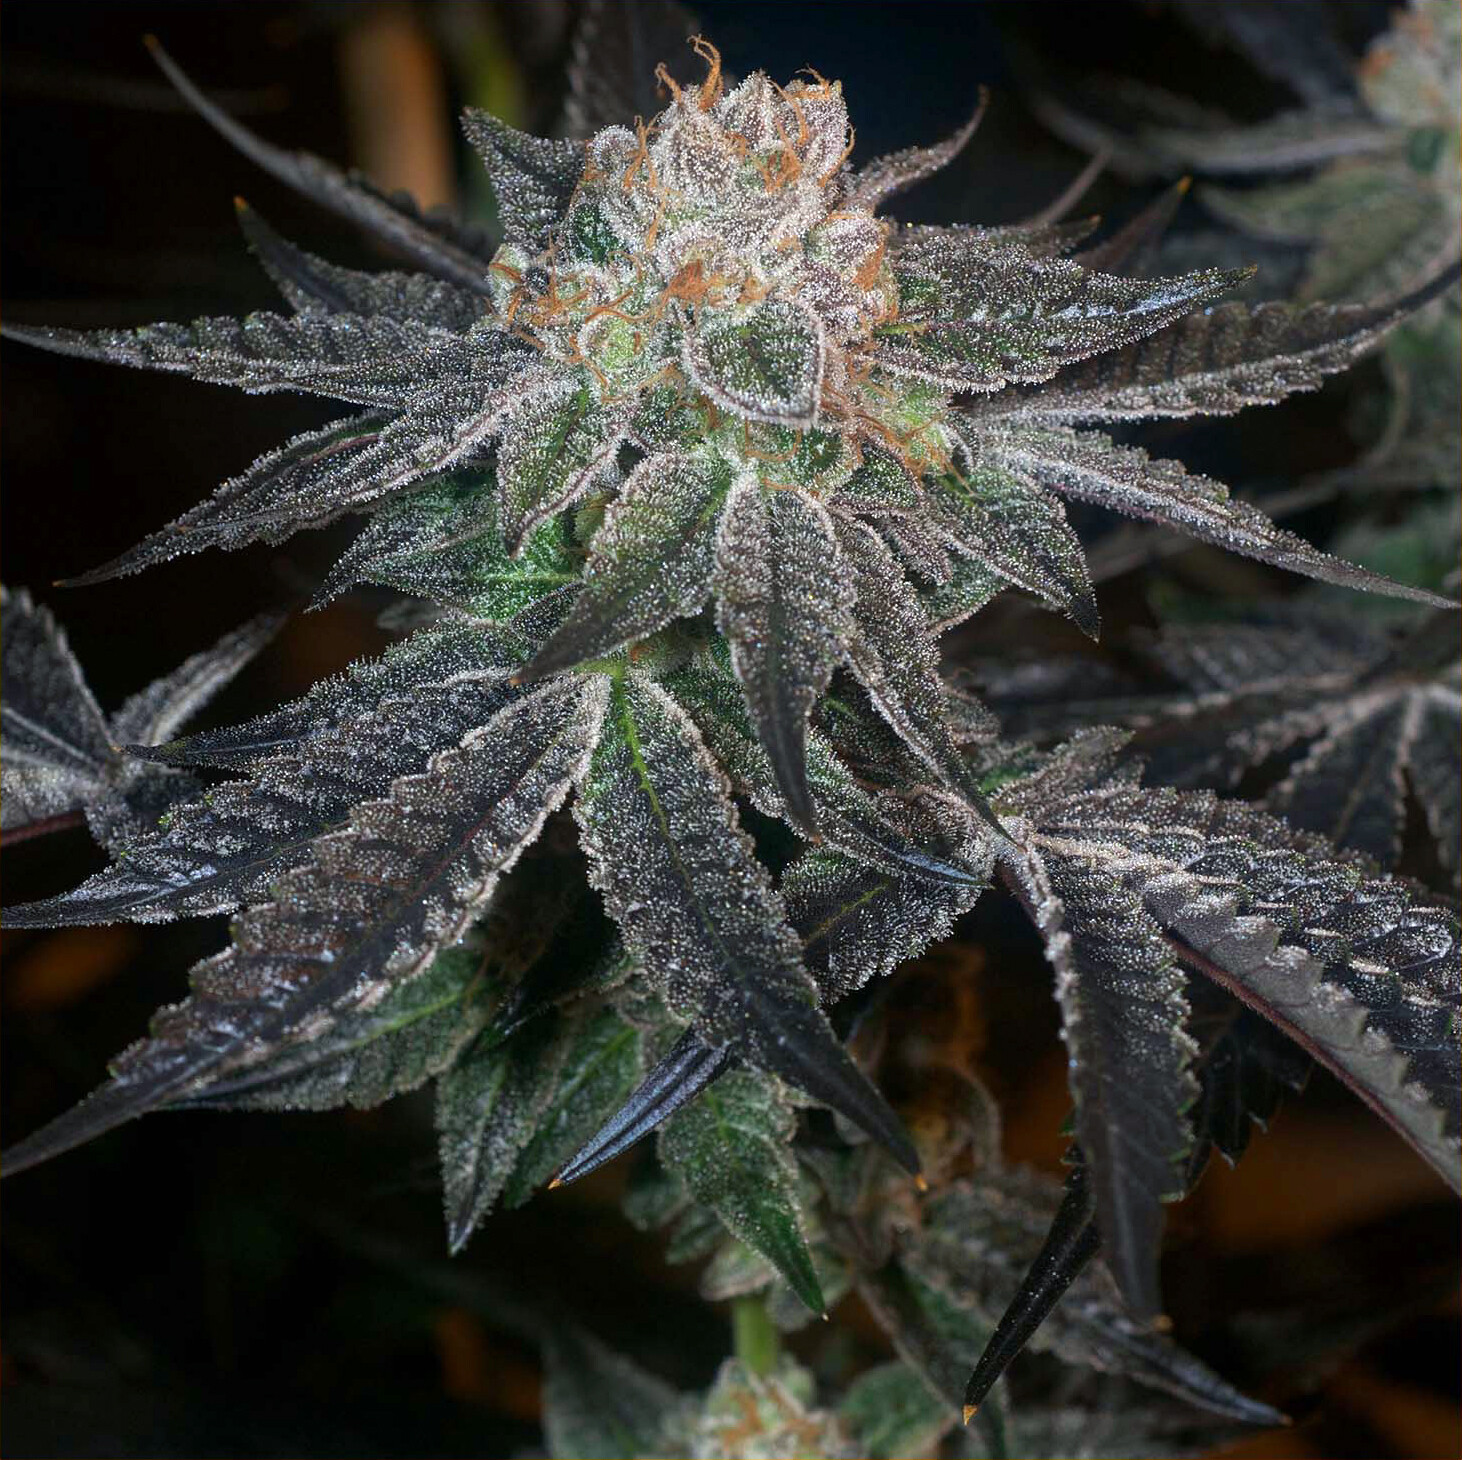 Girl Scout Cookies, Forum Cut, grown and photo'd by Irie G ...